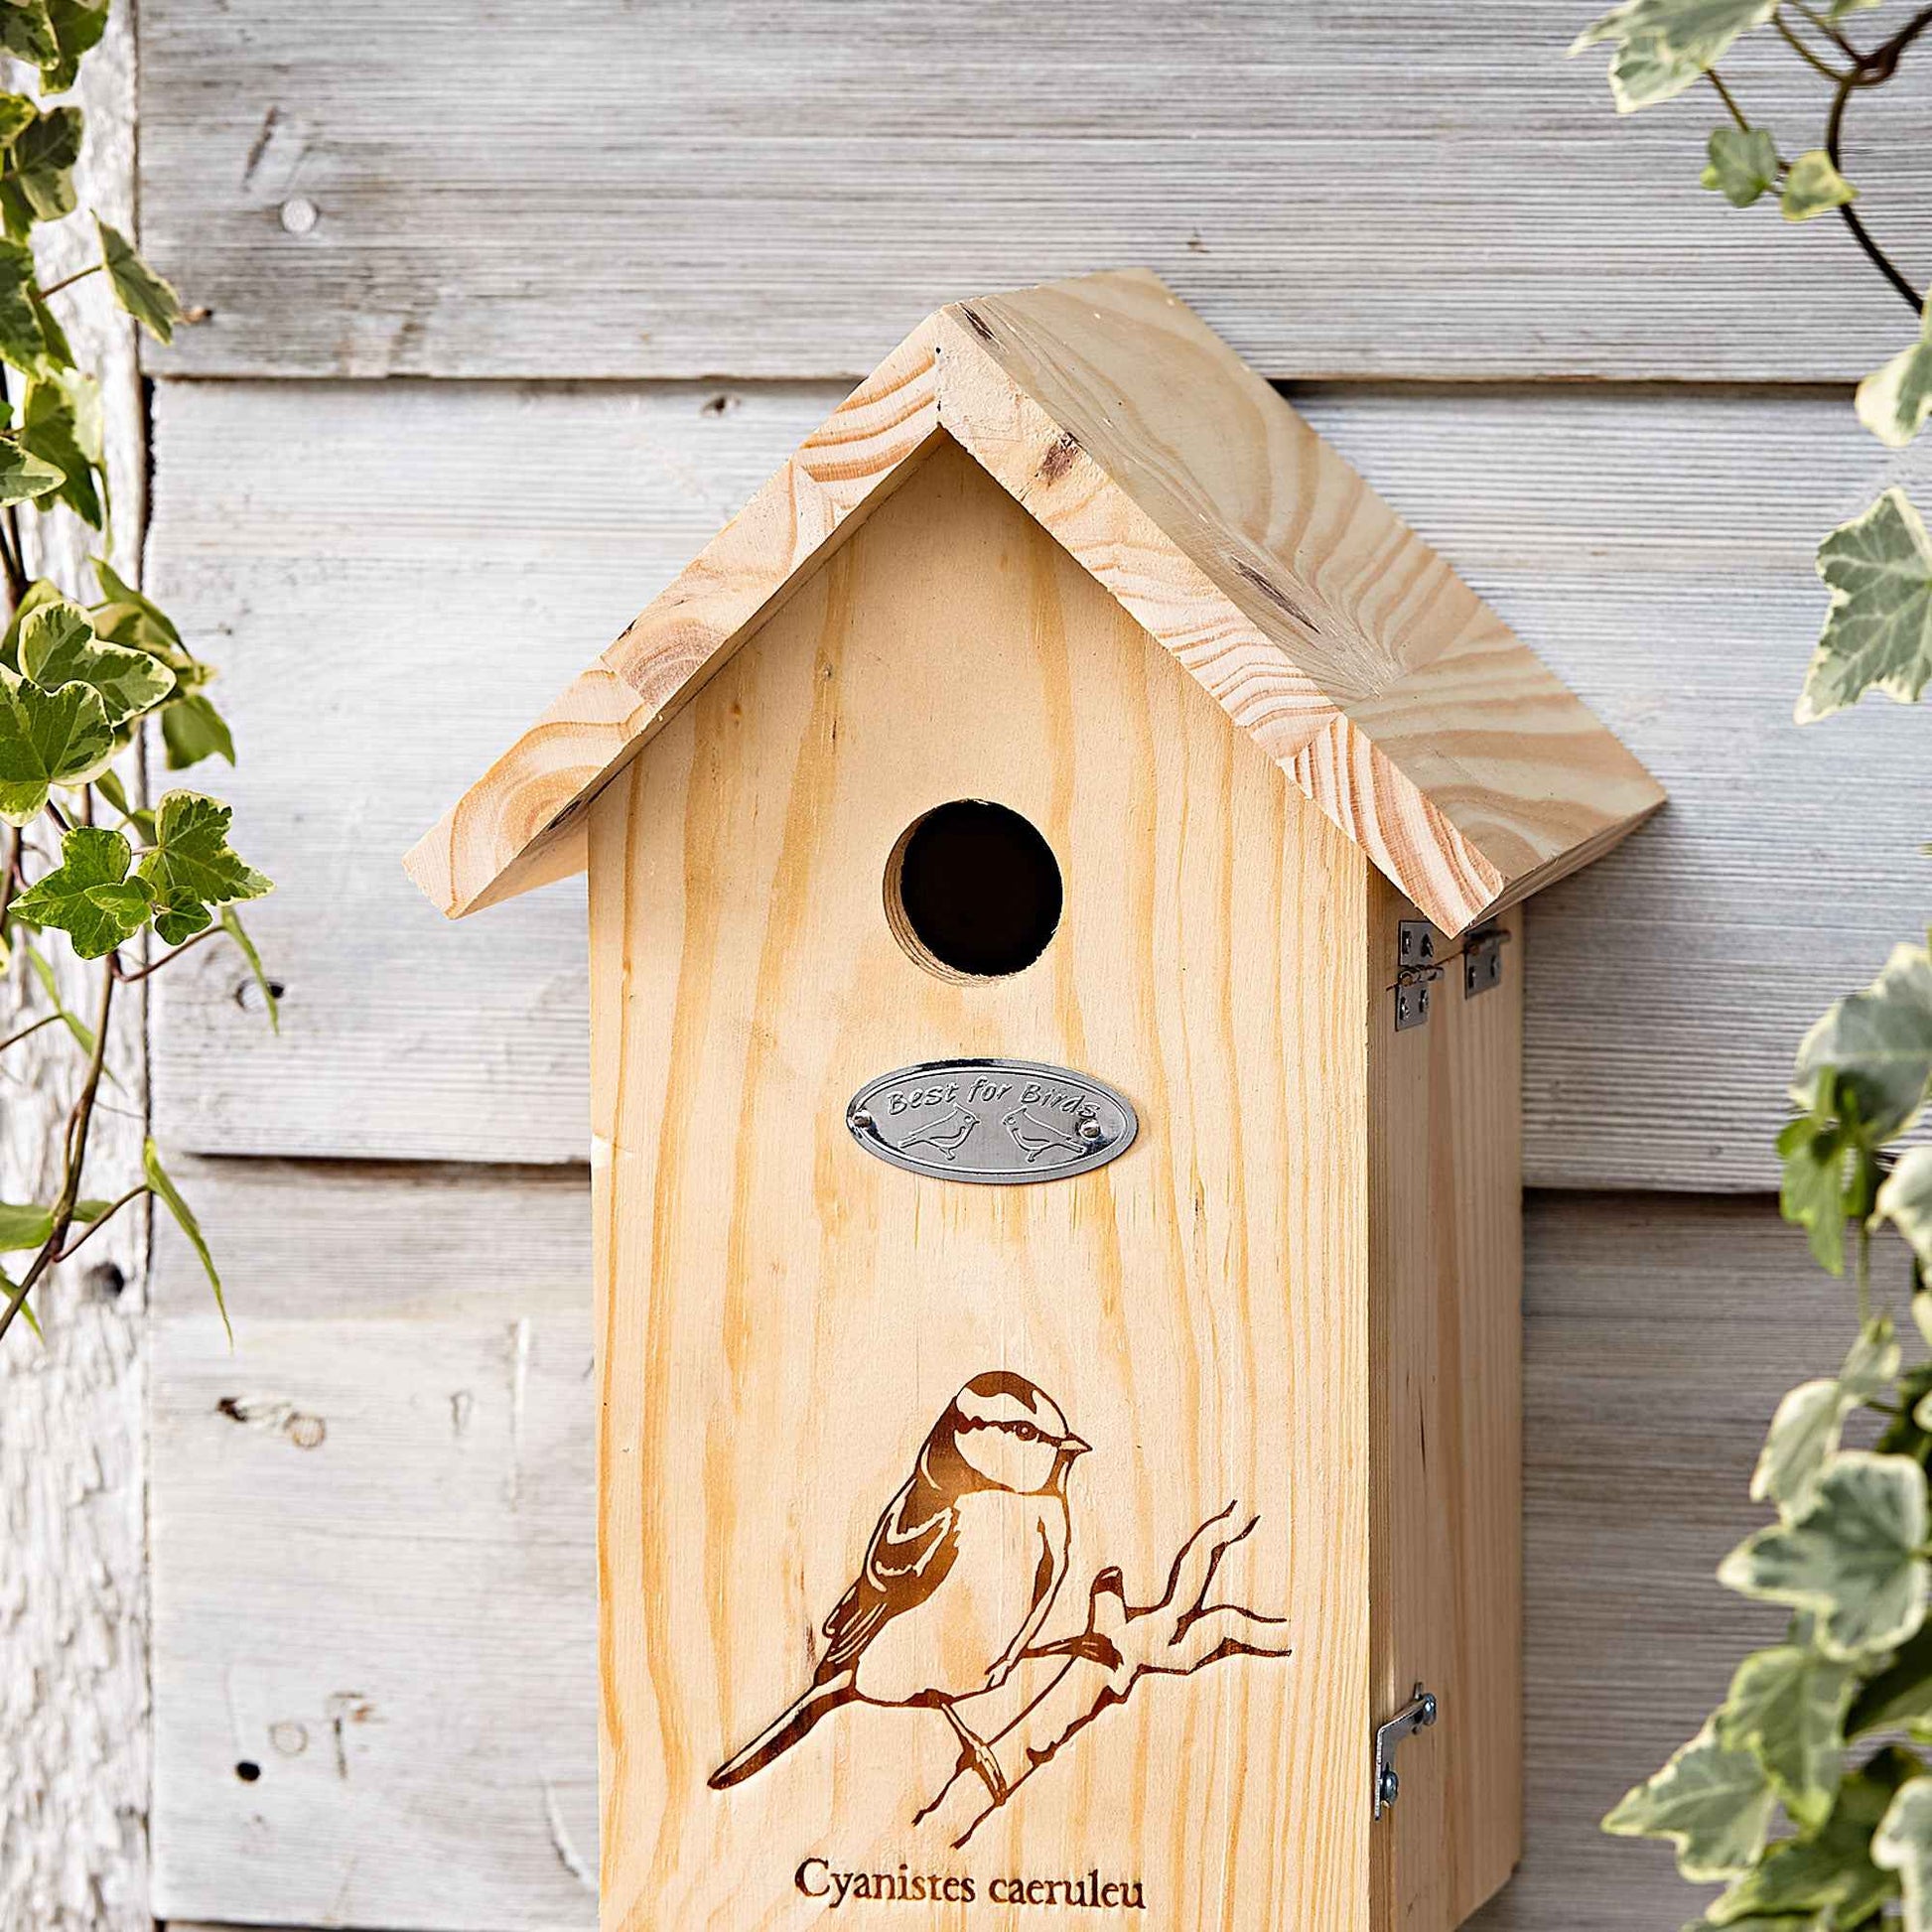 Best for Birds Nichoirs - Pour animaux